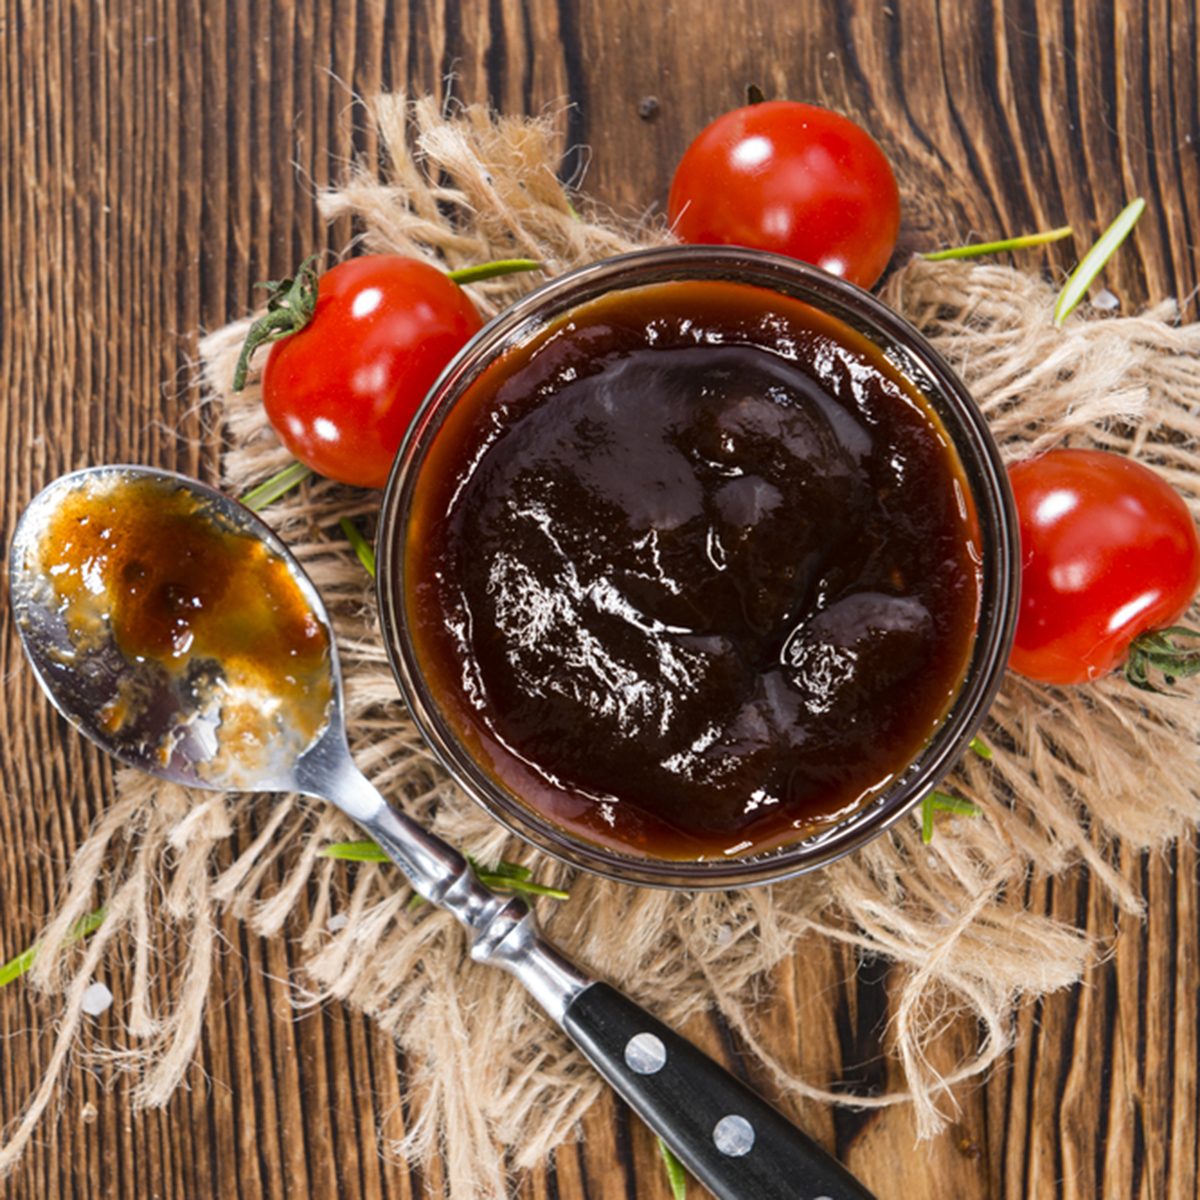 Homemade Barbeque Sauce with Tomatoes, Smoked Salt and fresh Herbs